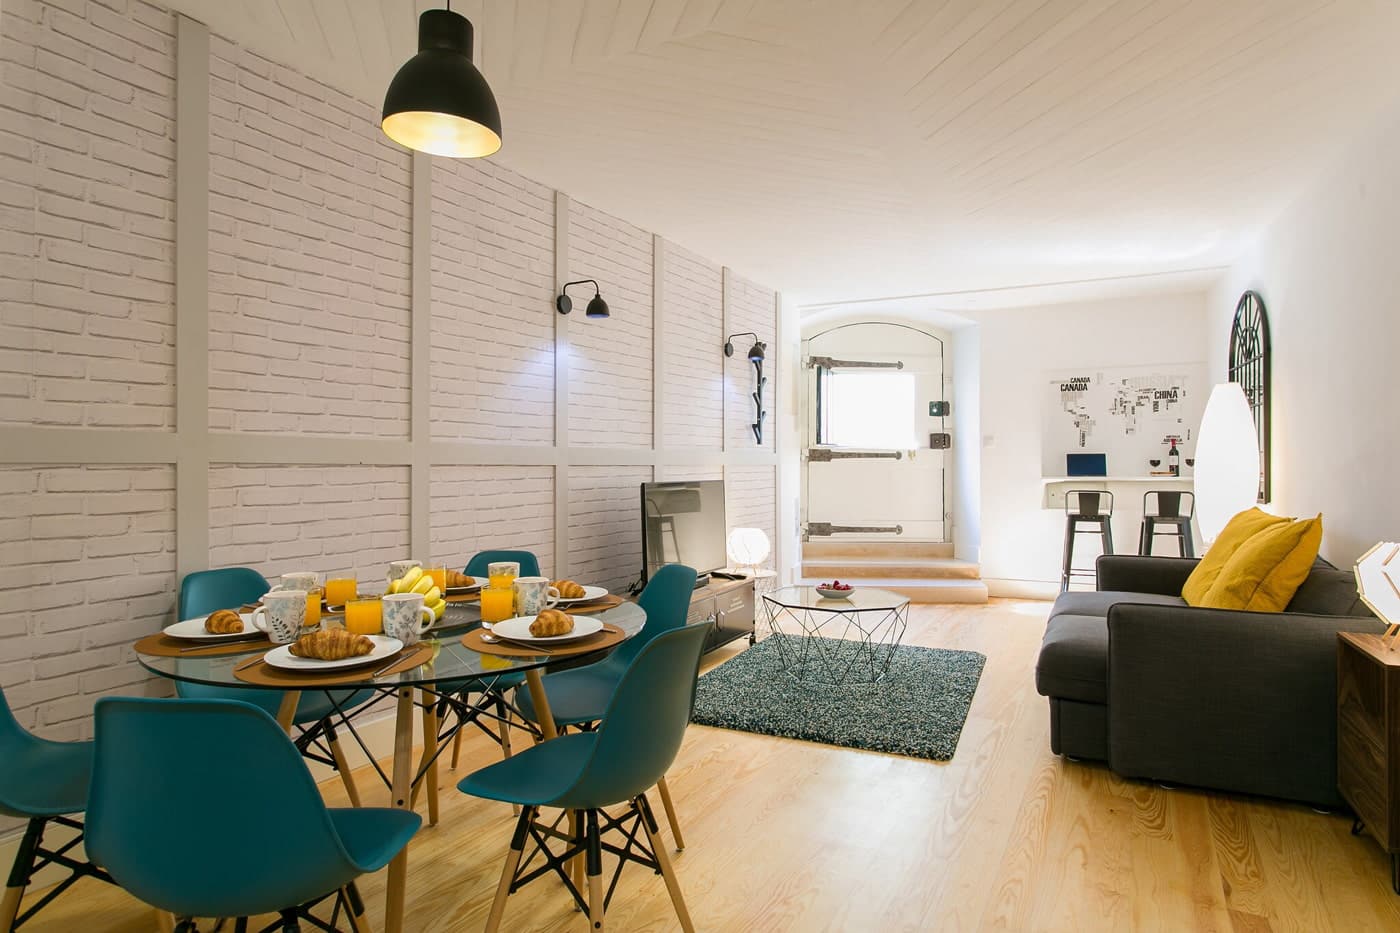 Vacation rental apartment in Lisbon